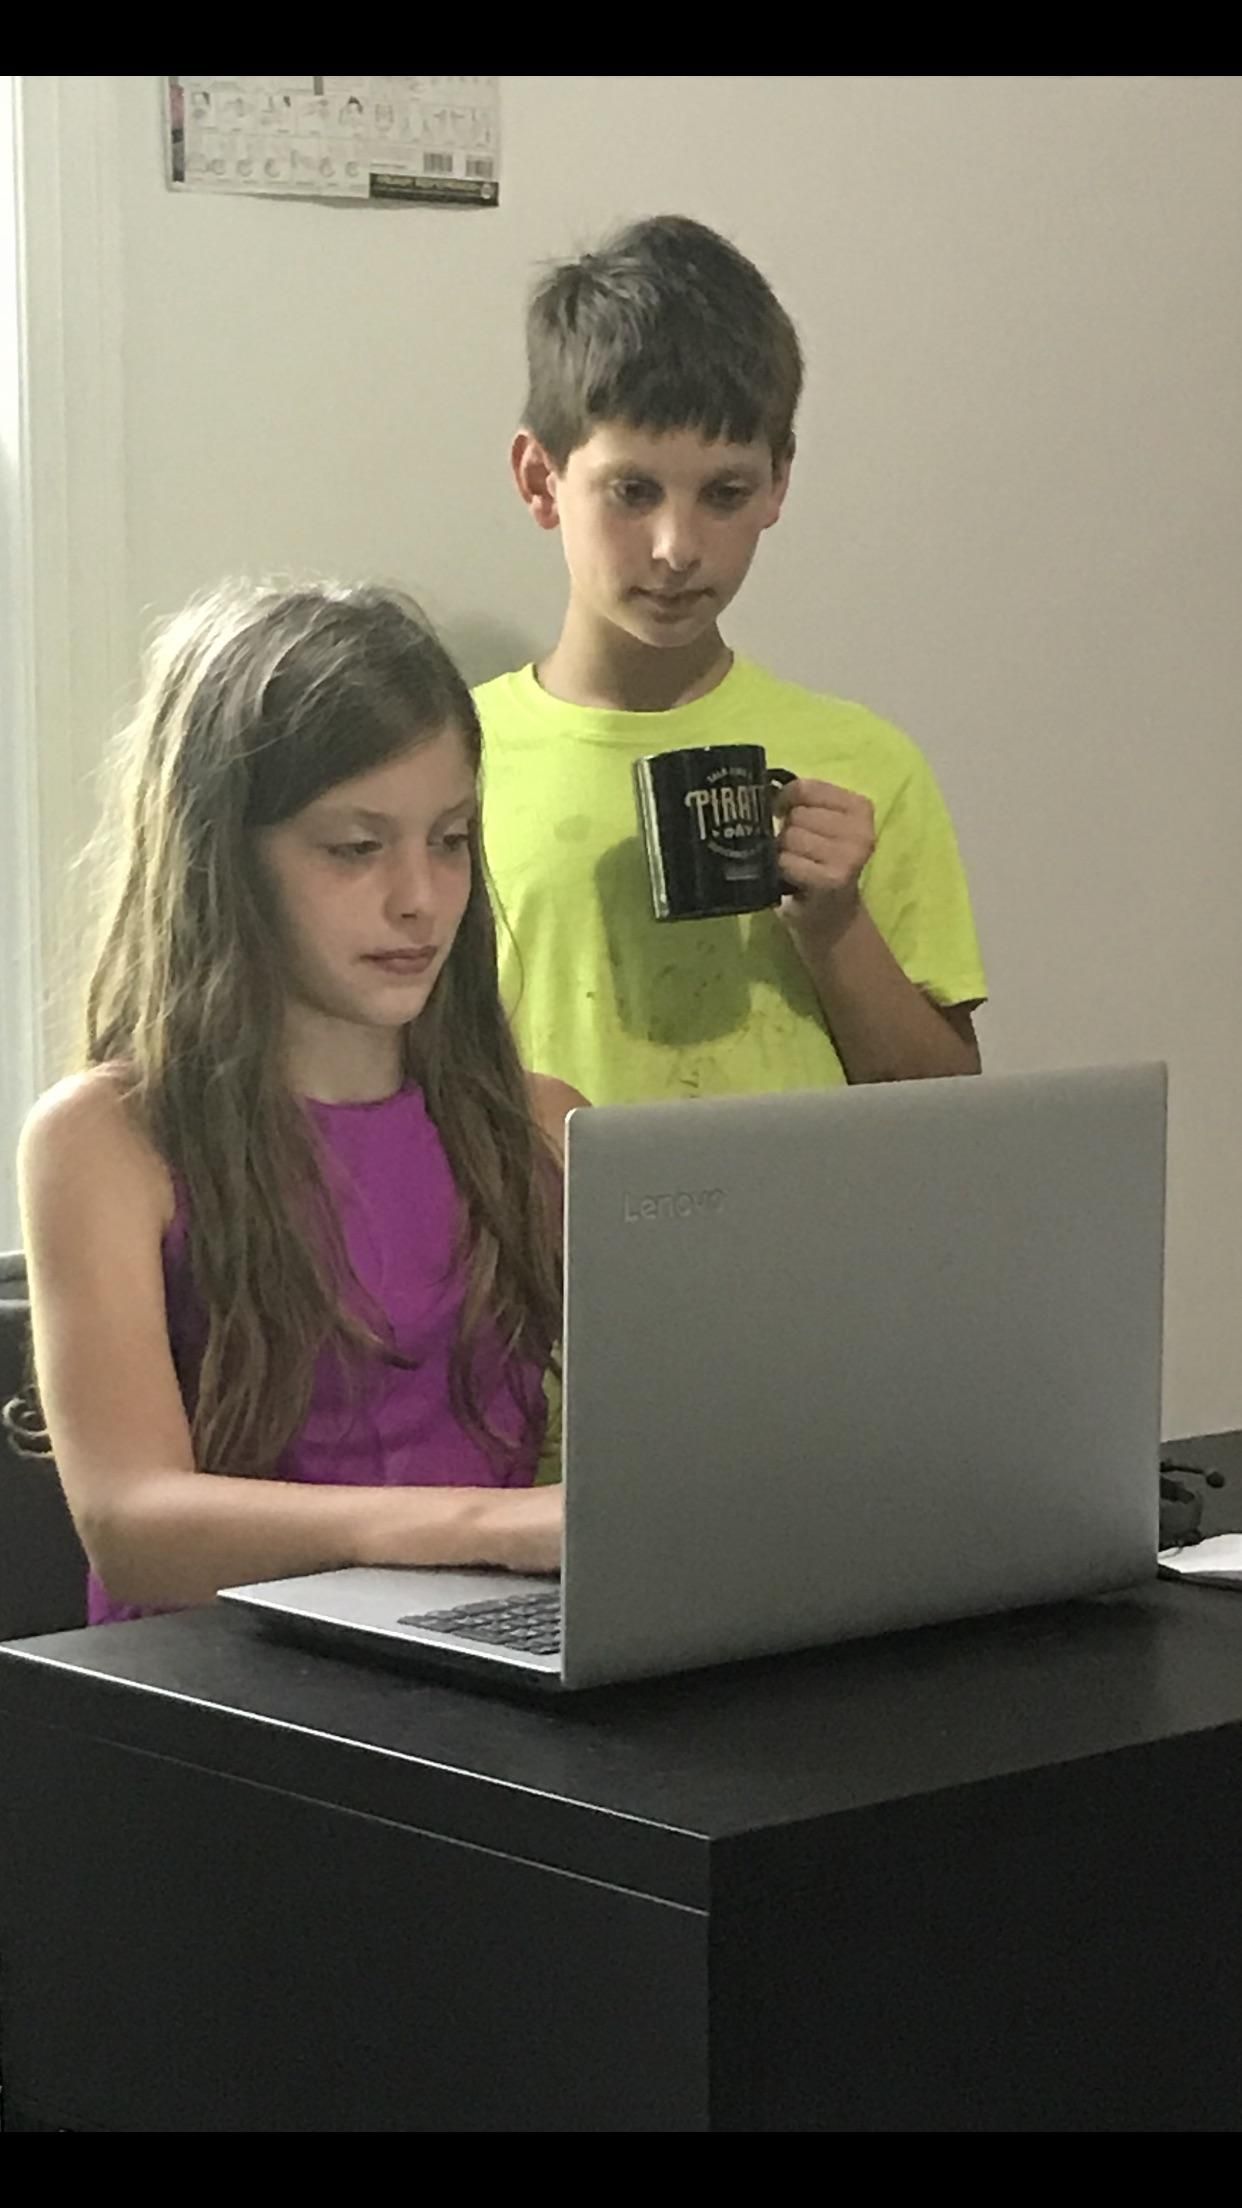 In their natural state, my kids are basically a children’s office stock photo